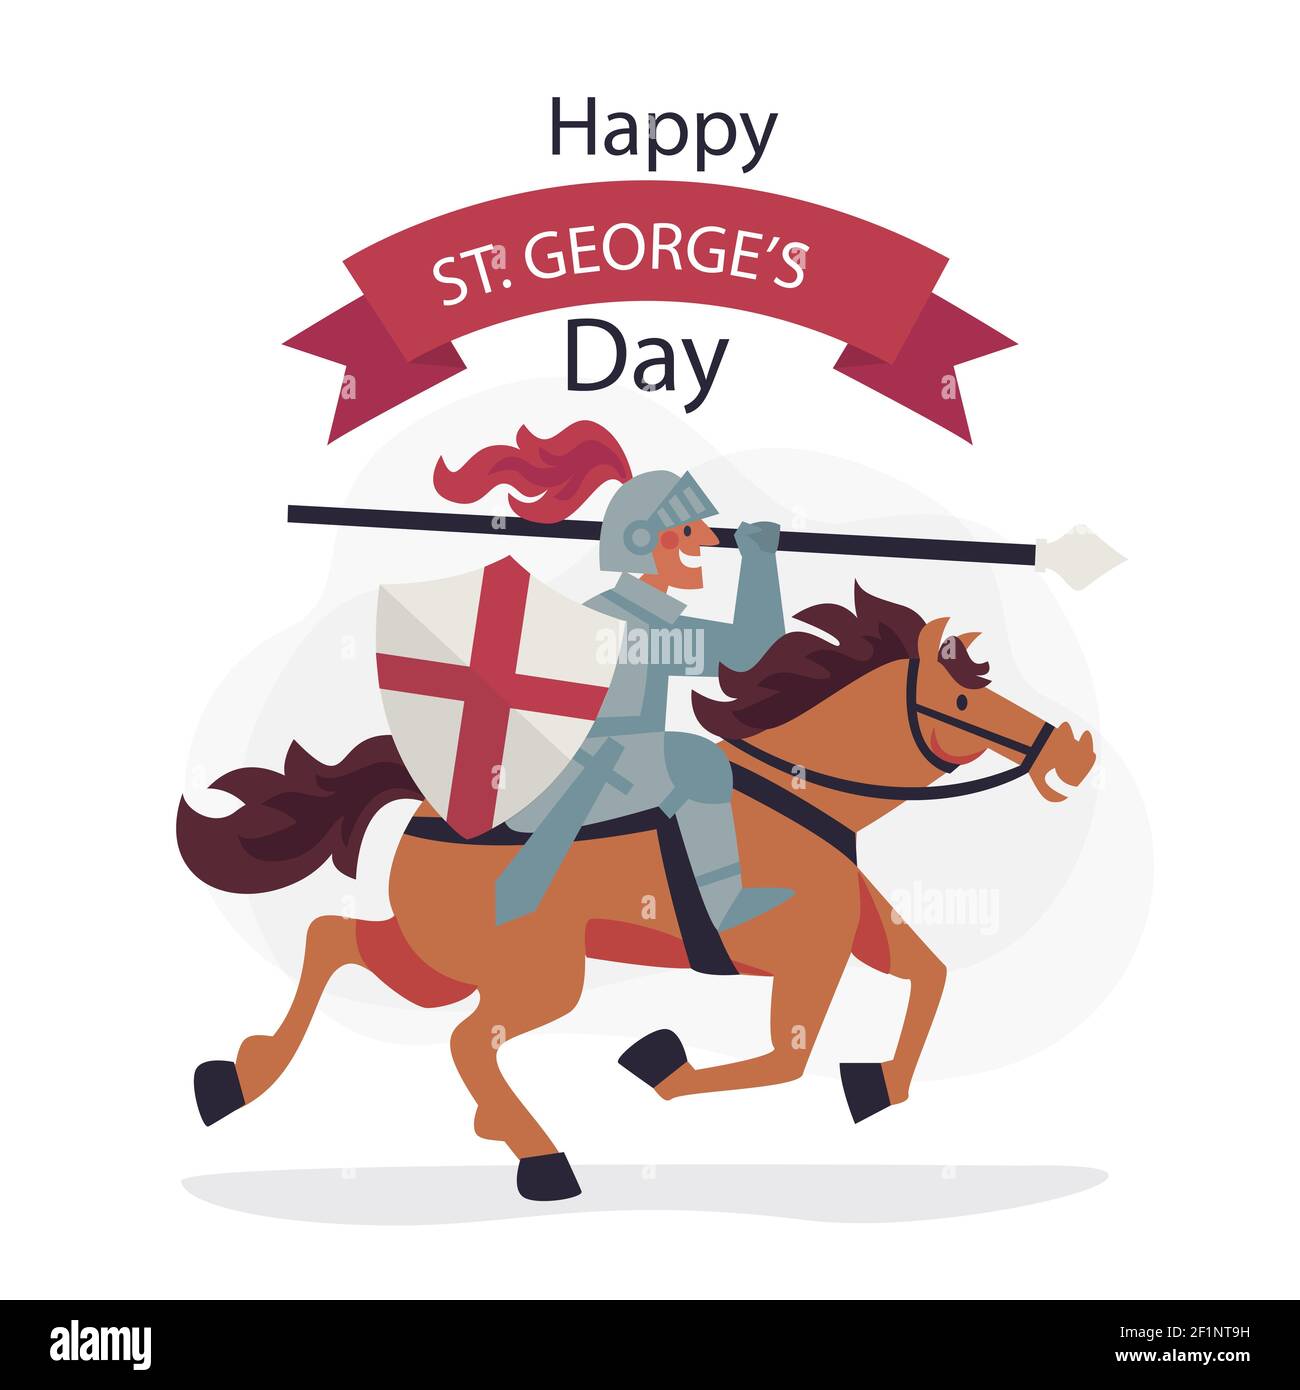 Hand drawn st. georges day illustration Vector illustration. Stock Vector